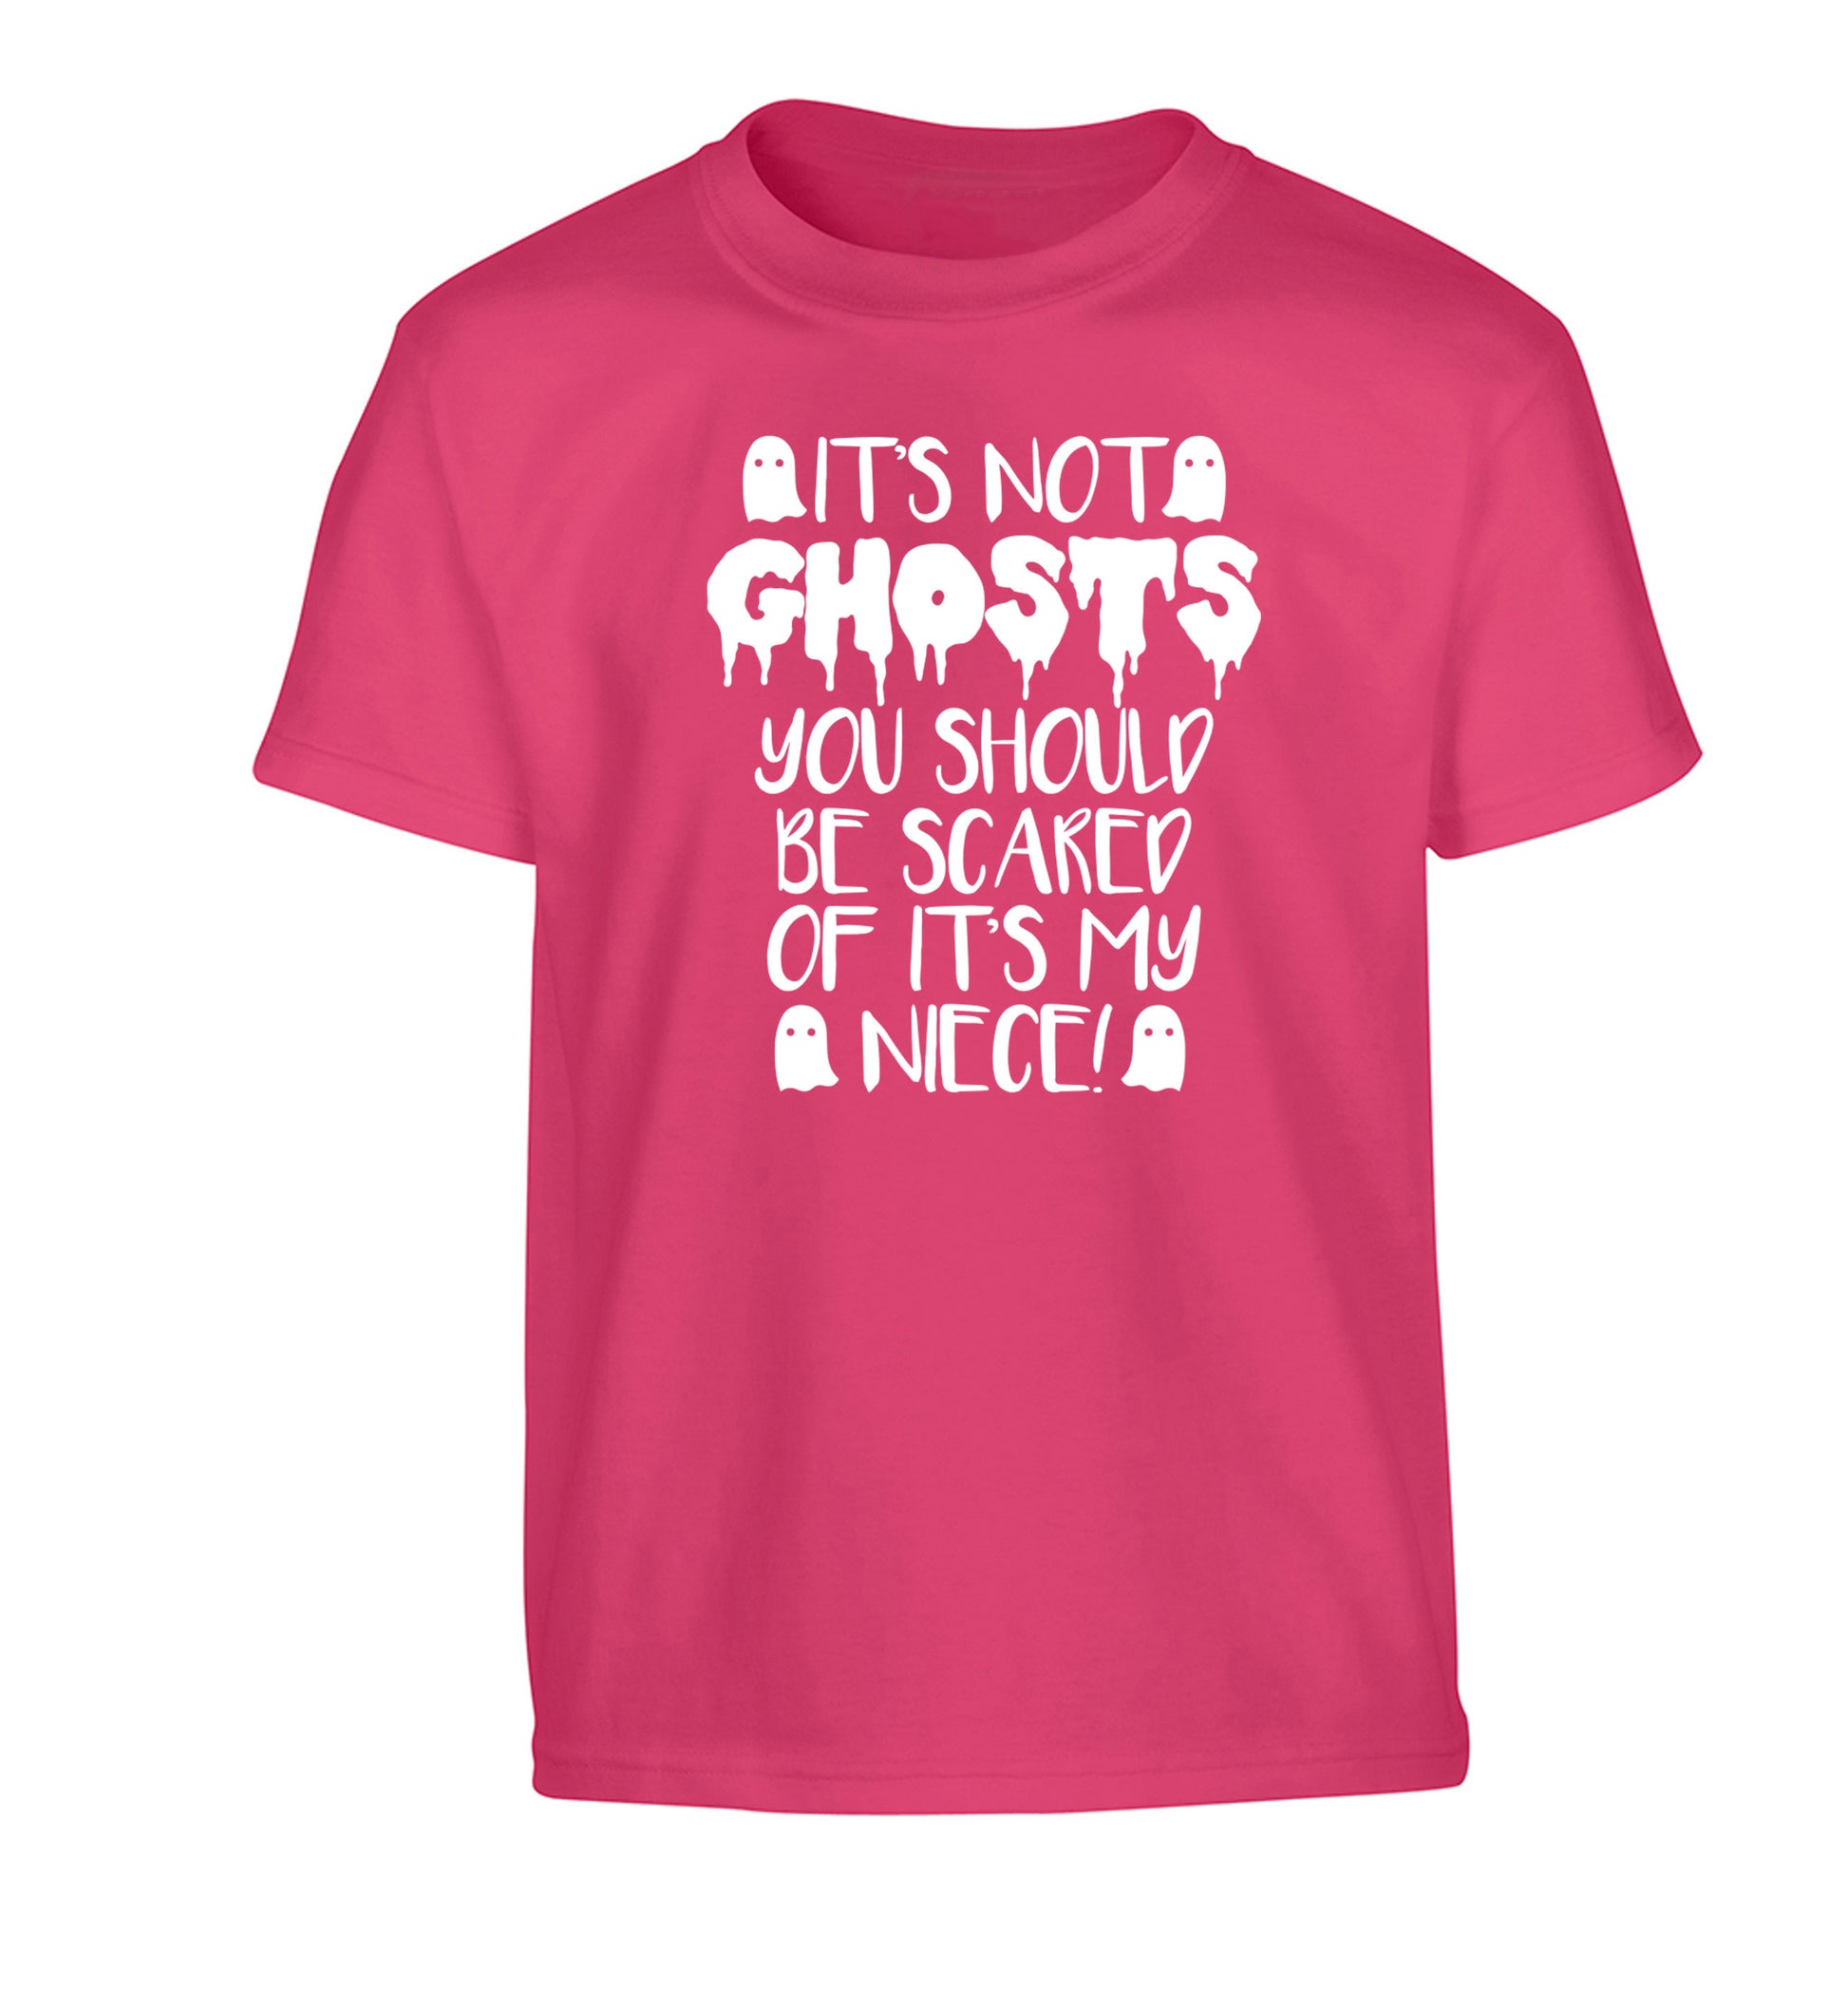 It's not ghosts you should be scared of it's my niece! Children's pink Tshirt 12-14 Years